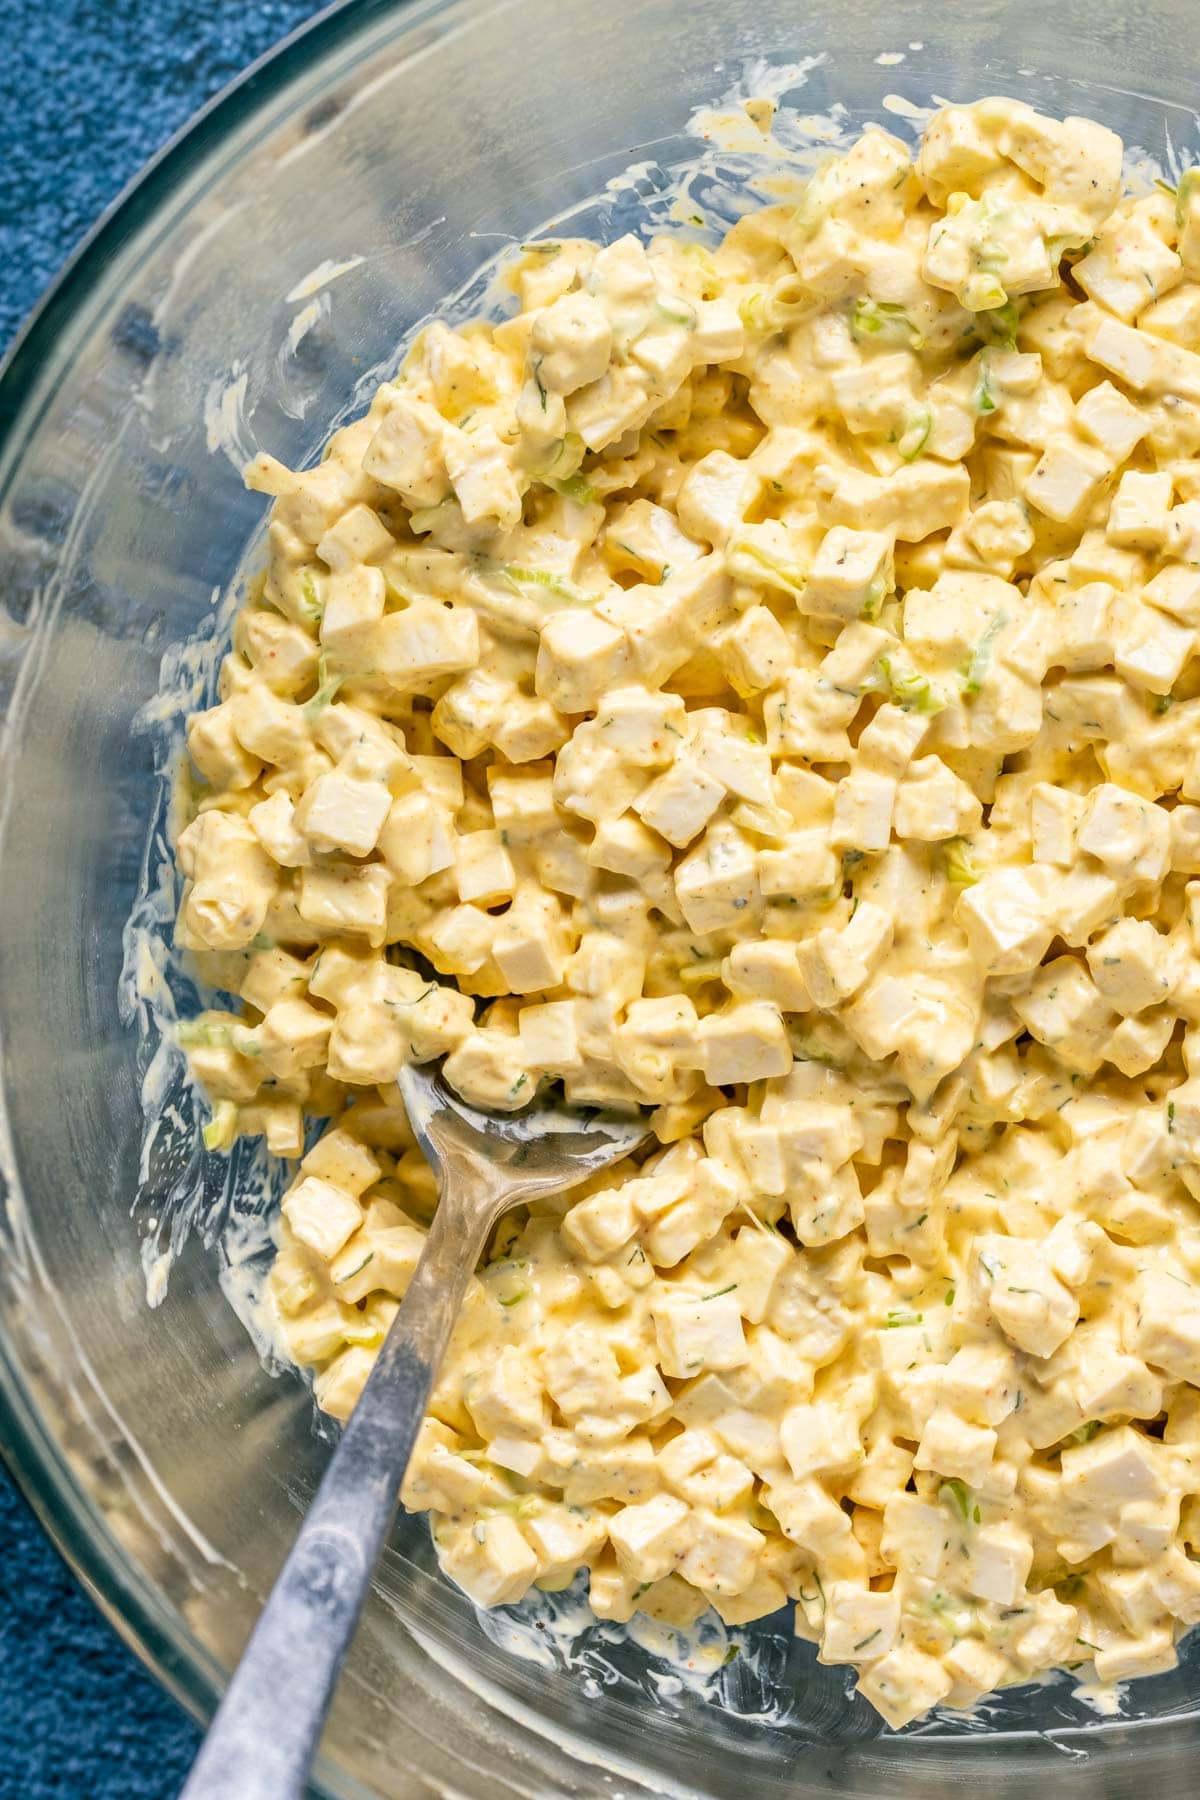 Vegan egg salad in a bowl with a spoon.